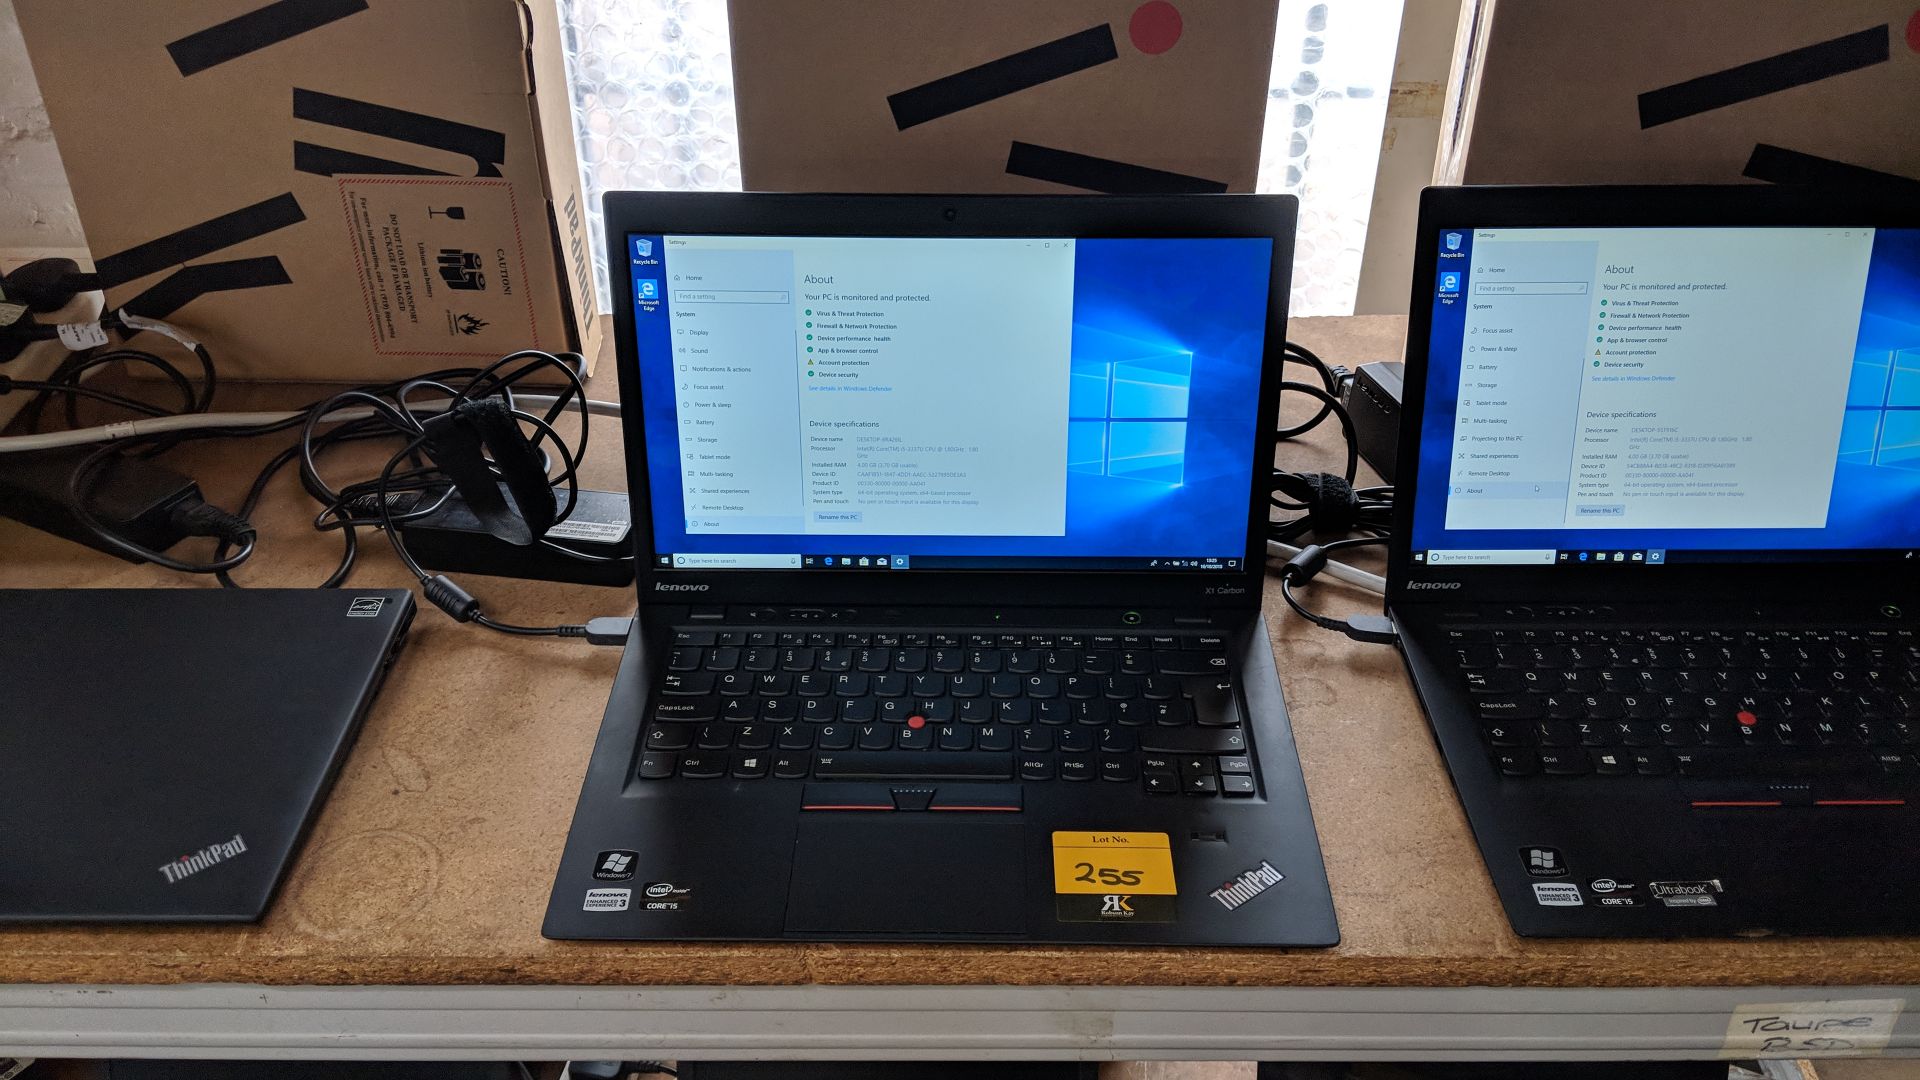 Lenovo ThinkPad X1 Carbon notebook computer with built-in webcam, Intel Core i5-3337U CPU@1.8GHz,